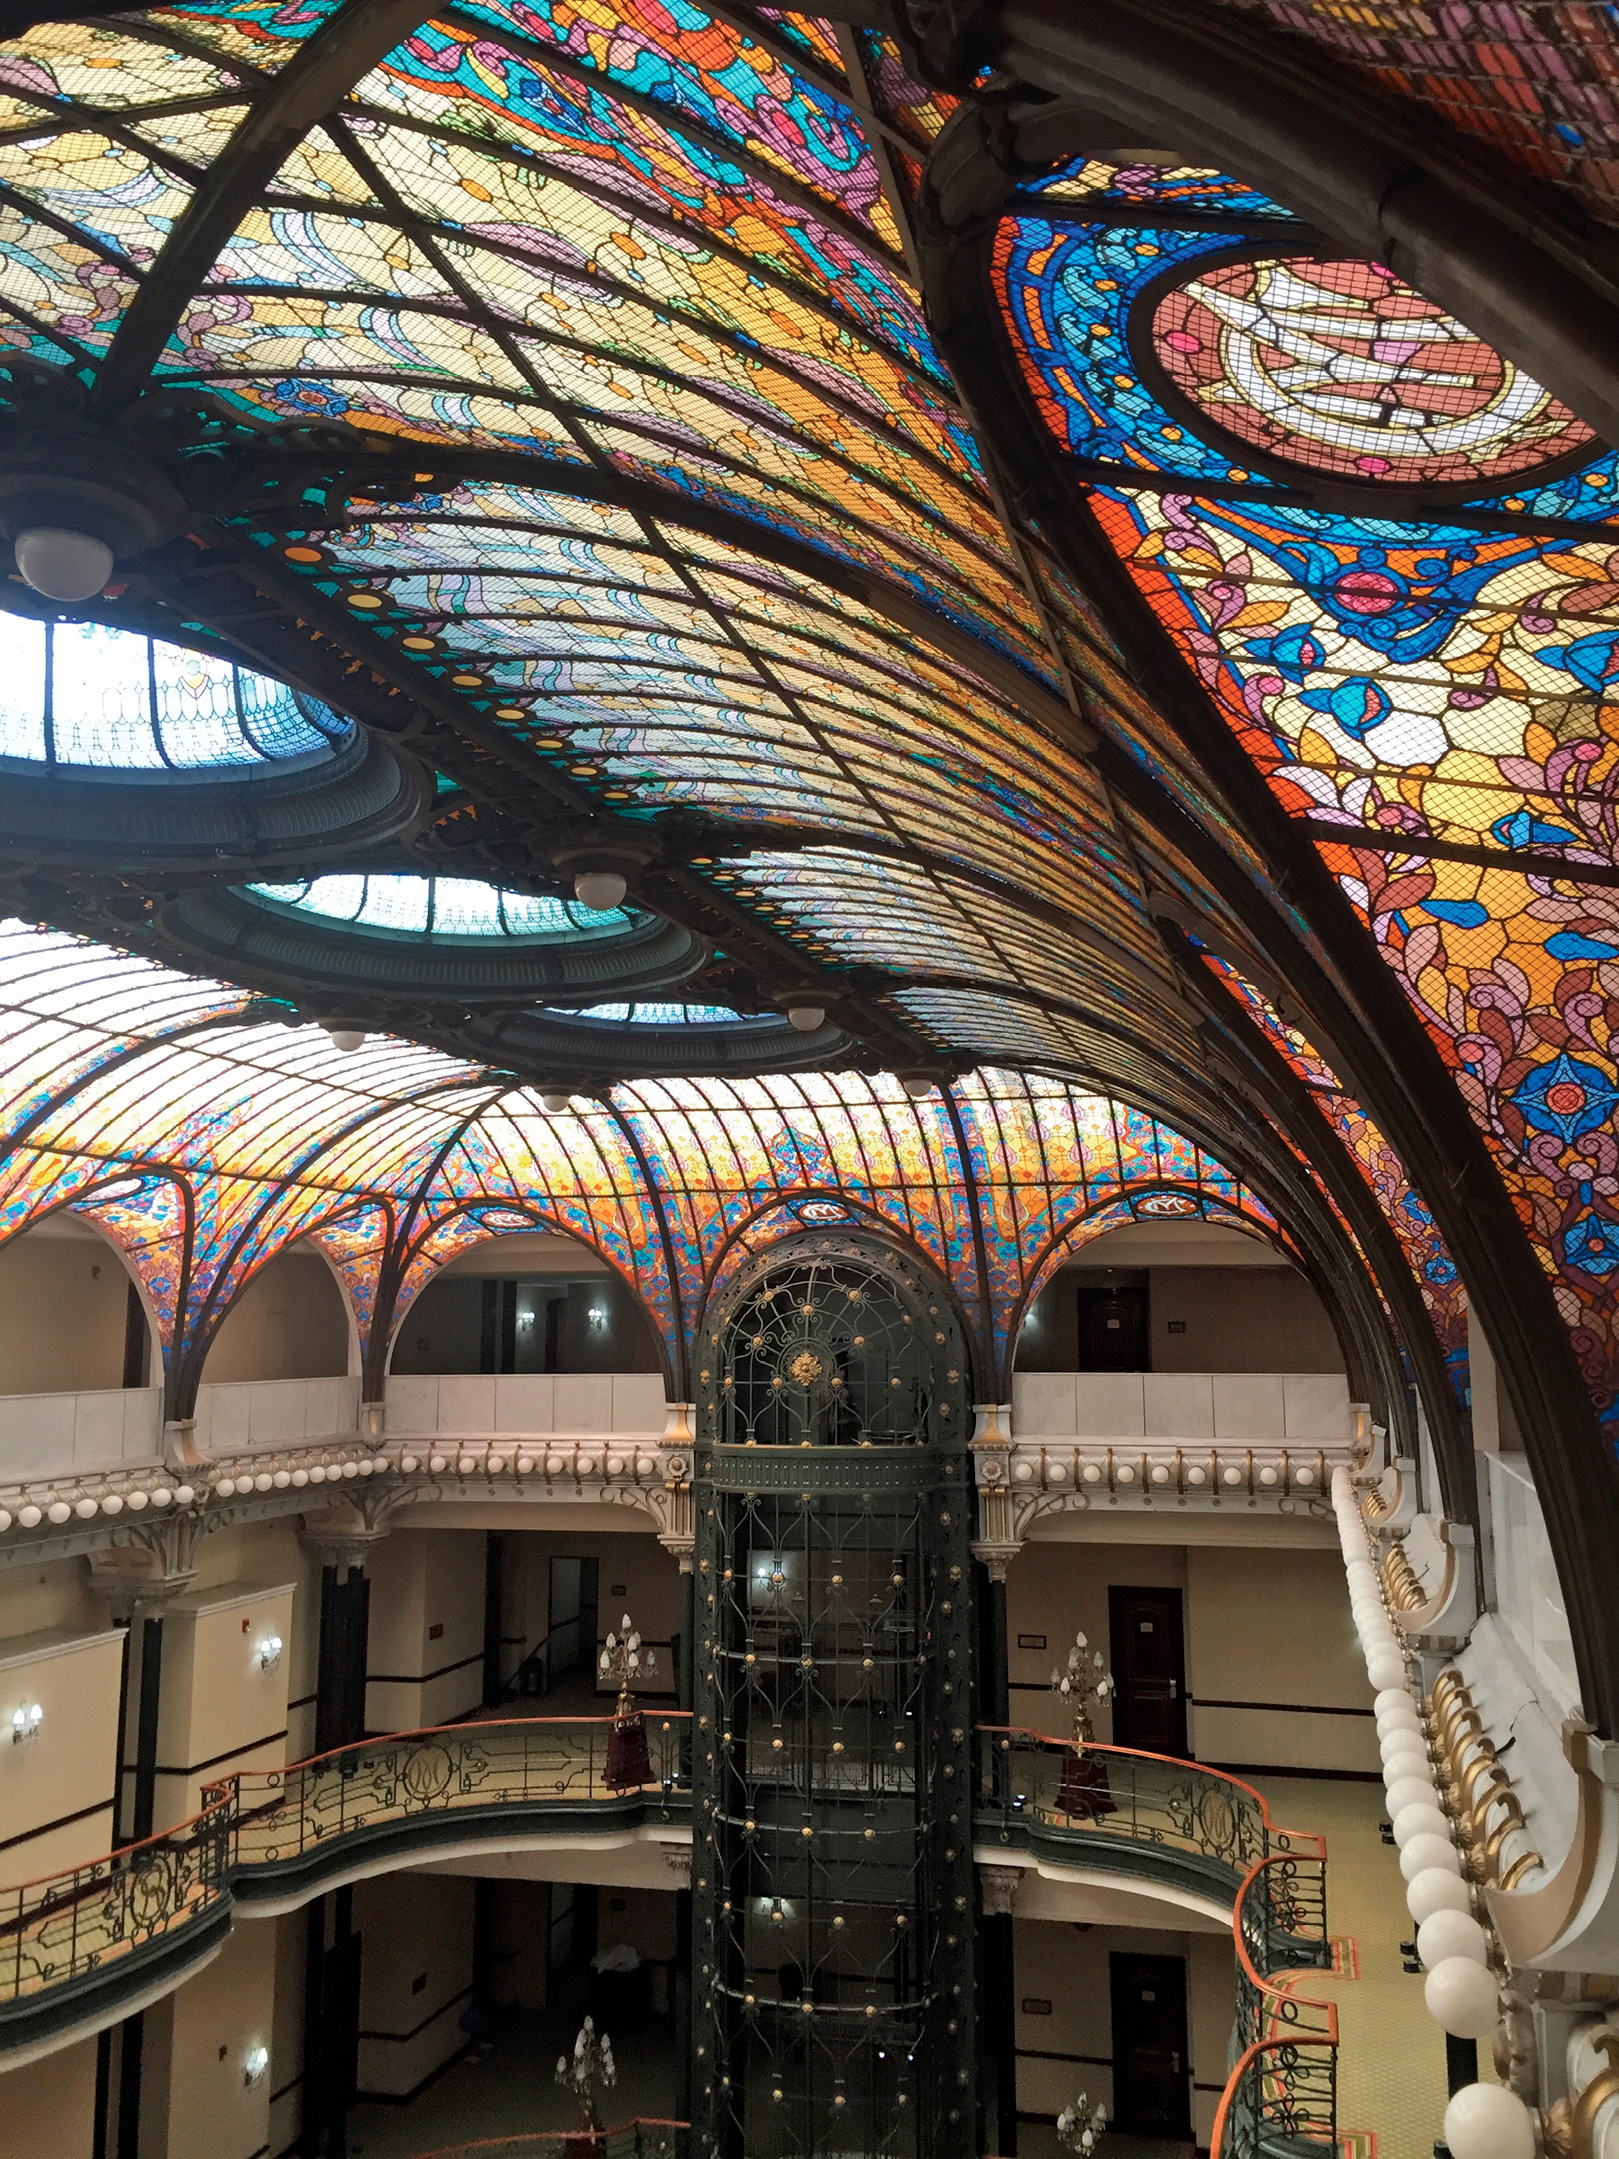 Step inside this historic hotel and look up at the massive stained-glass - photo 3